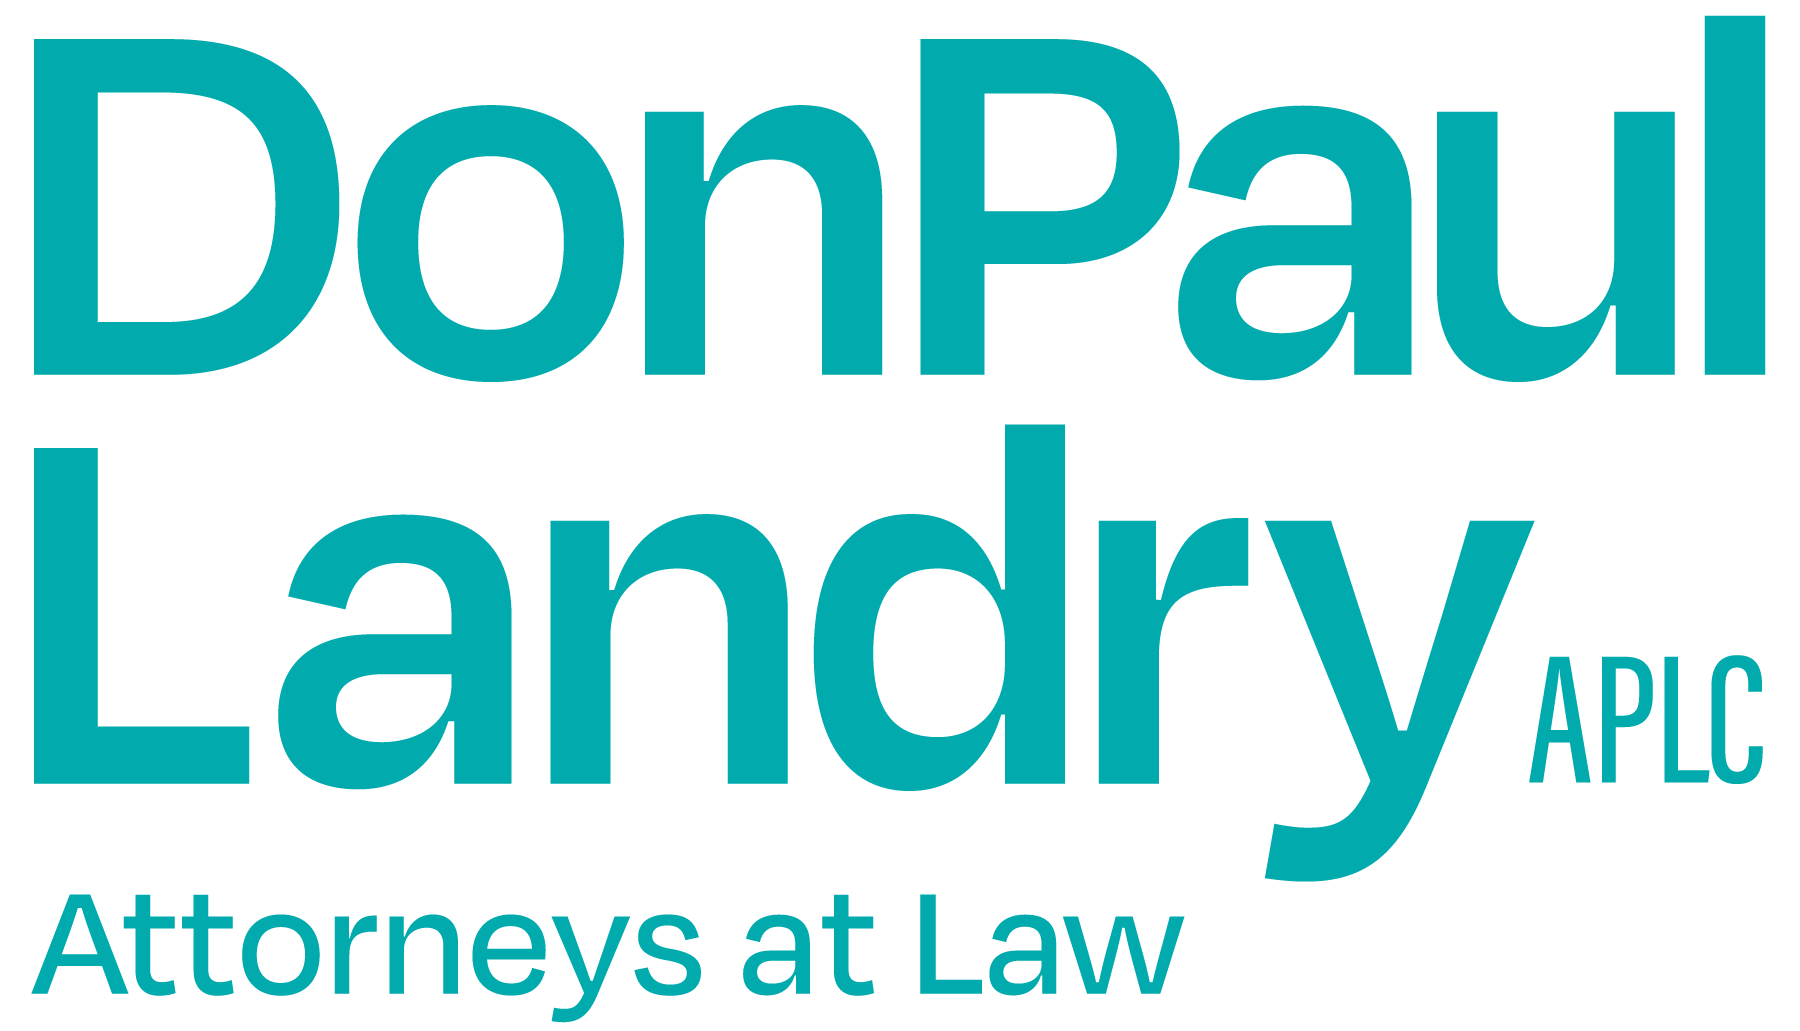 The logo for don paul landry attorneys at law is blue and white.